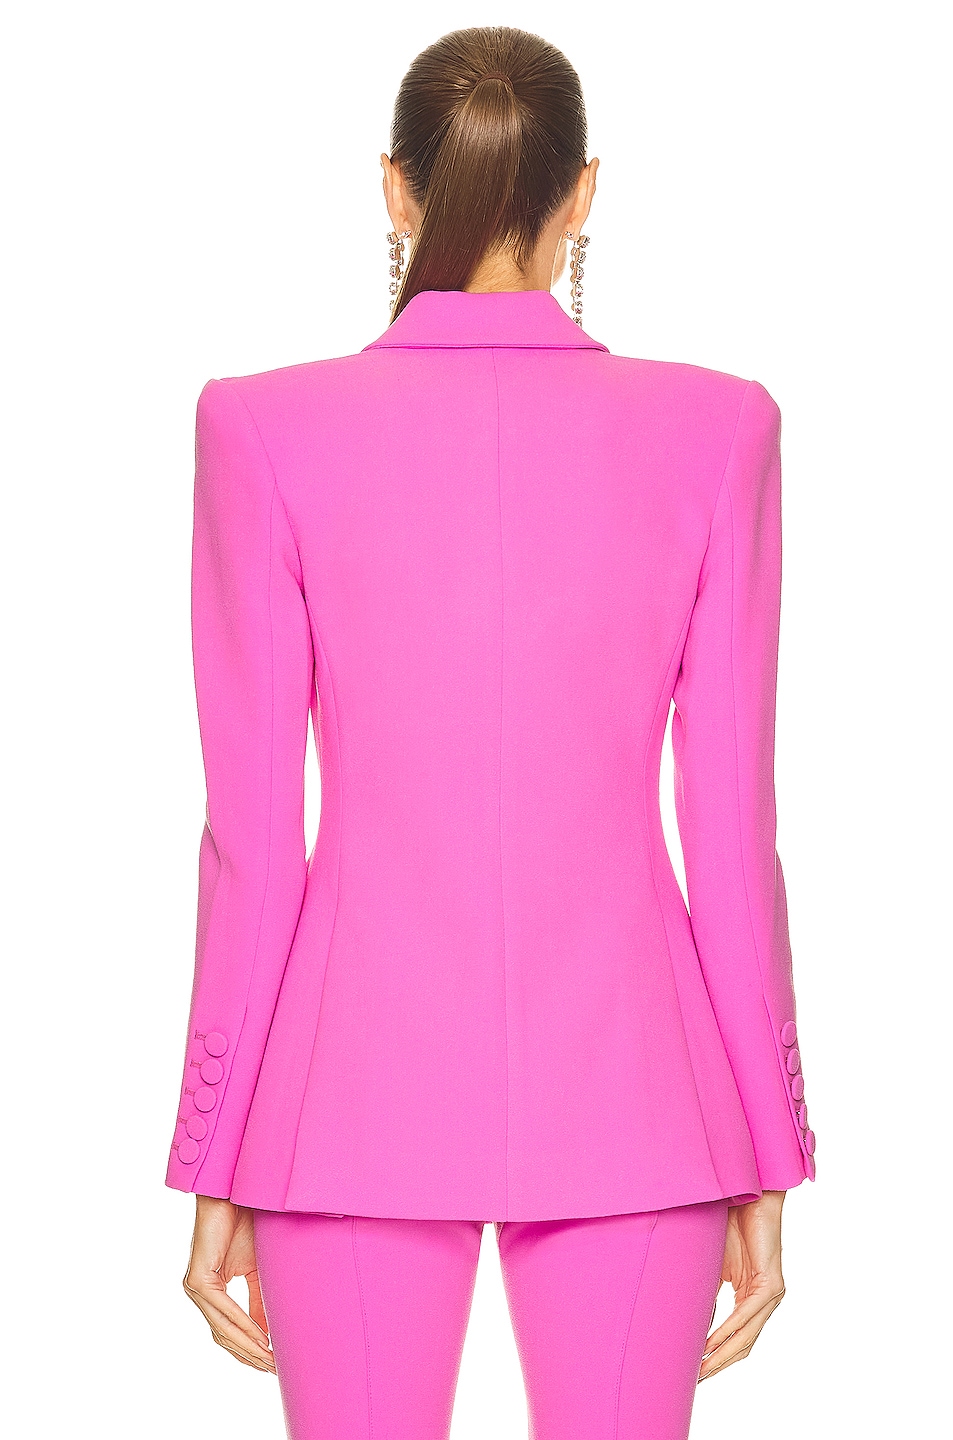 Alex Perry Carter Fitted Blazer in Pink | FWRD